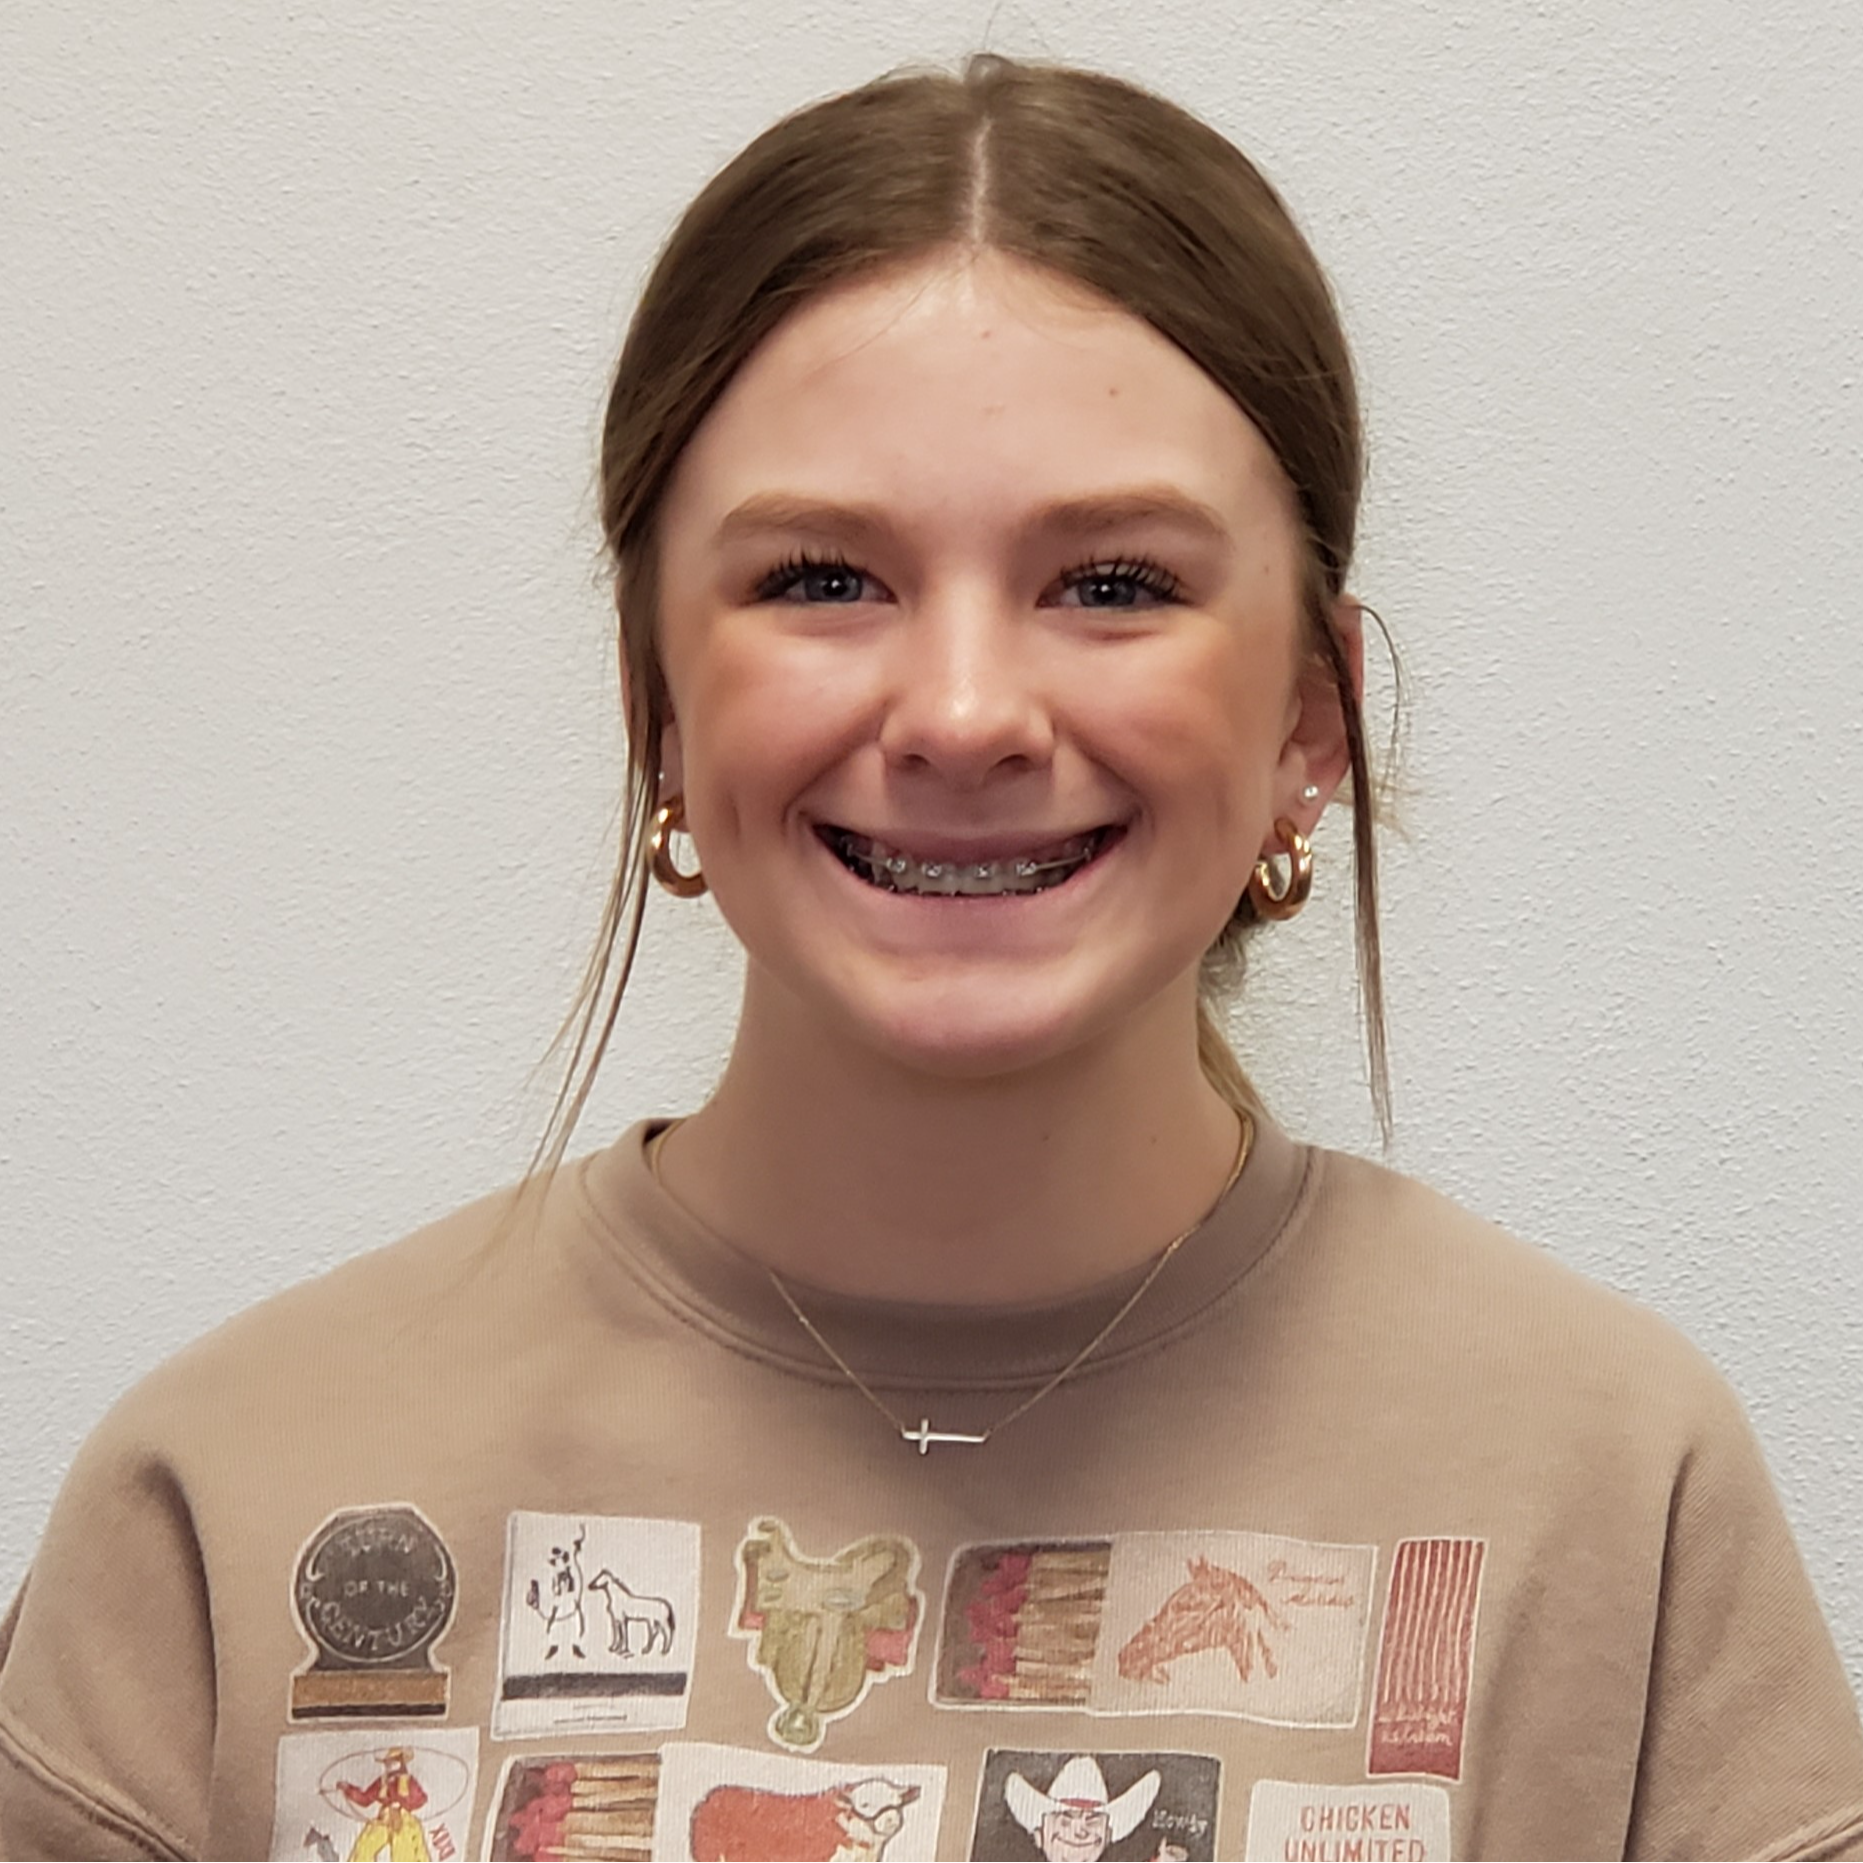 smiling girl with dark blonde hair pulled up wearing a tan sweatshirt with pictures of saddles, horses, cowboys, and cows on it